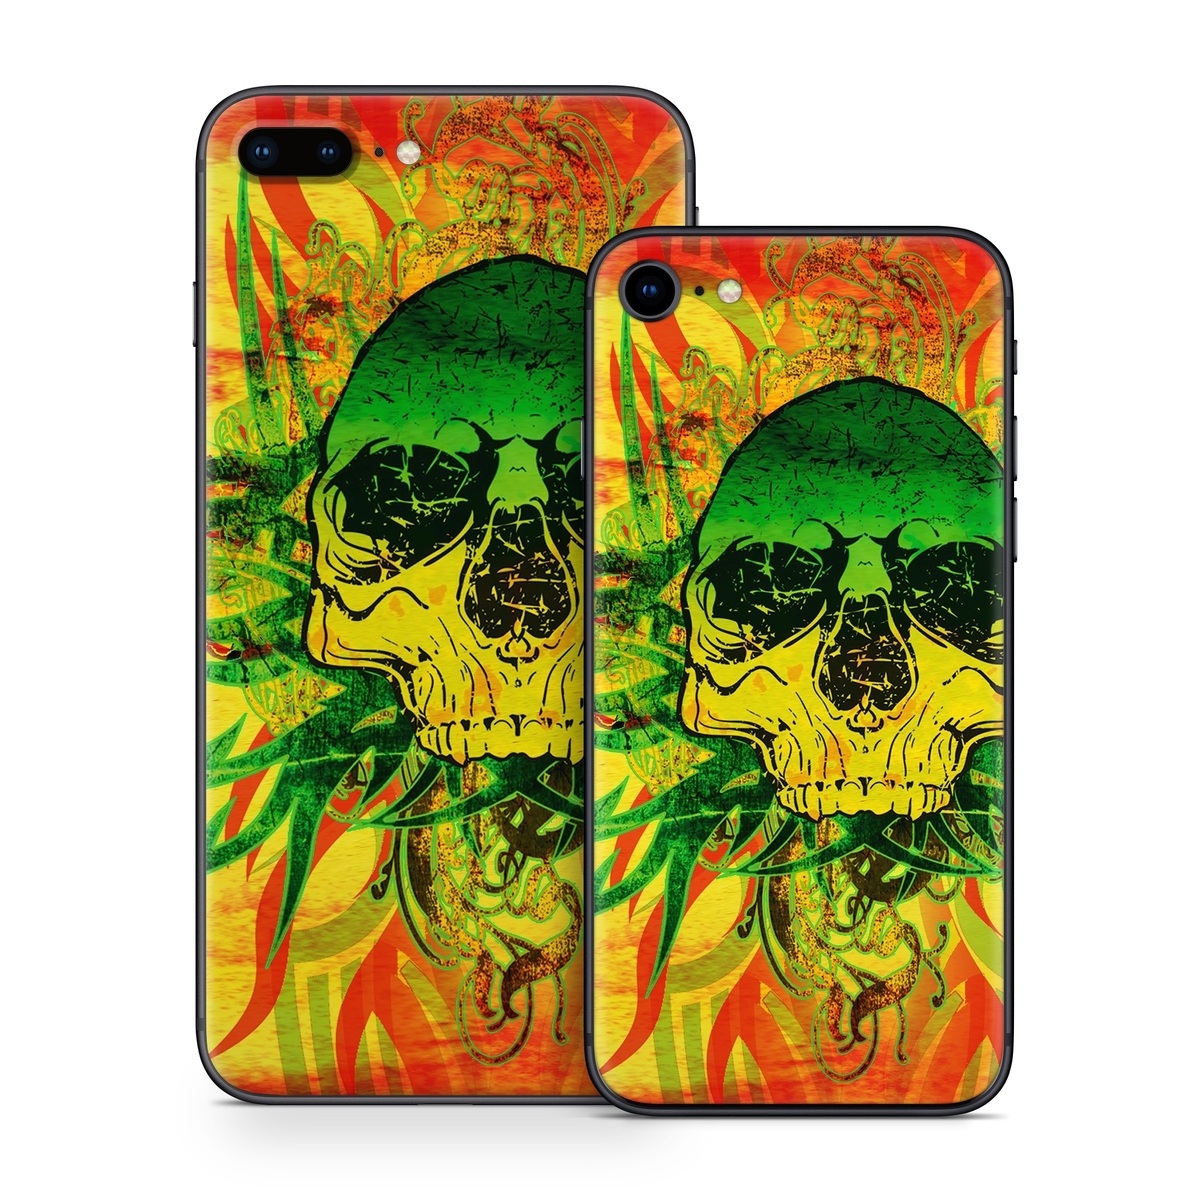 iPhone 8 Series Skin design of Psychedelic art, Skull, Illustration, Bone, Art, Graphic design, Visual arts, Poster, Plant, Painting, with green, orange, black, red colors